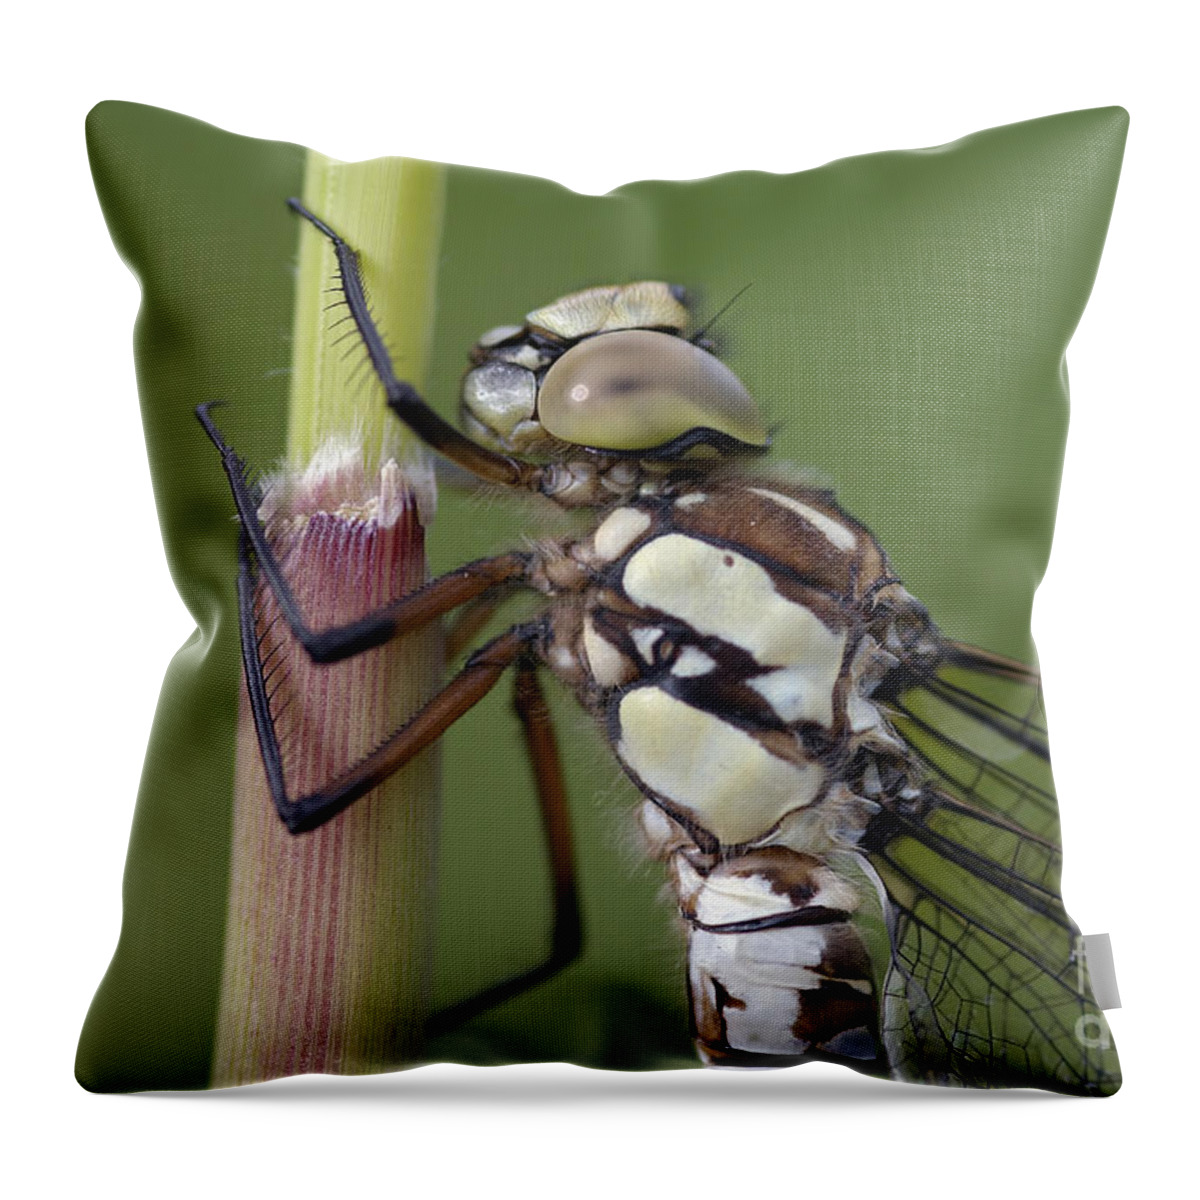 Undyed Throw Pillow featuring the photograph Head Of The Dragonfly by Michal Boubin